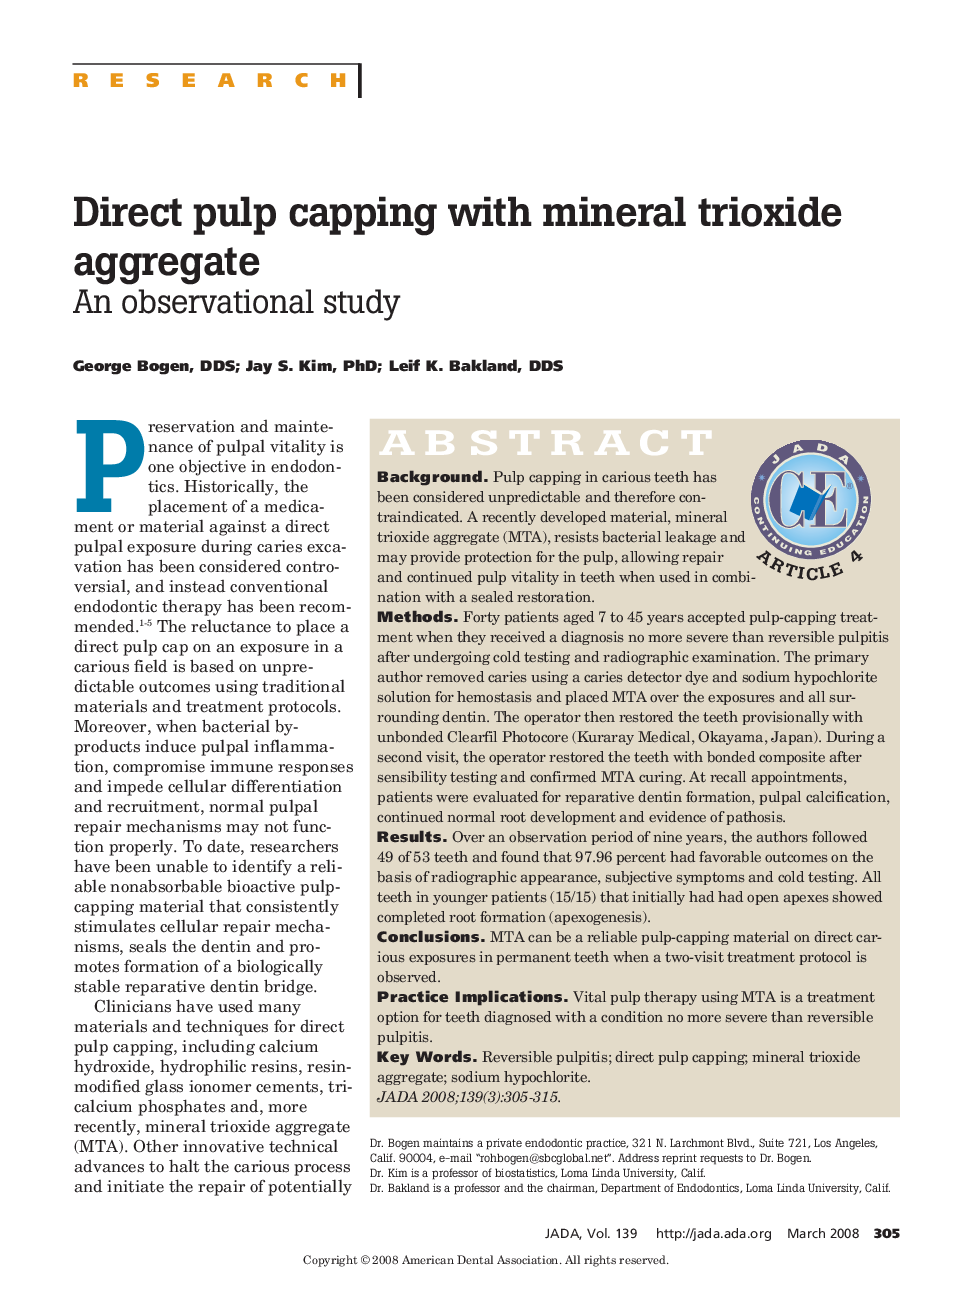 Direct Pulp Capping With Mineral Trioxide Aggregate : An Observational Study